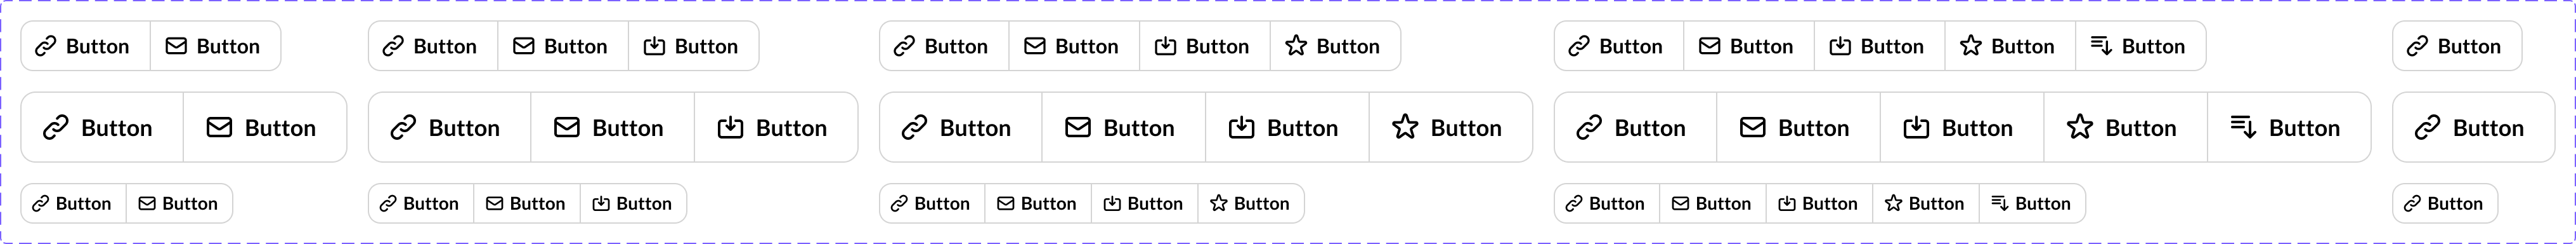 Button Group - Icon Left